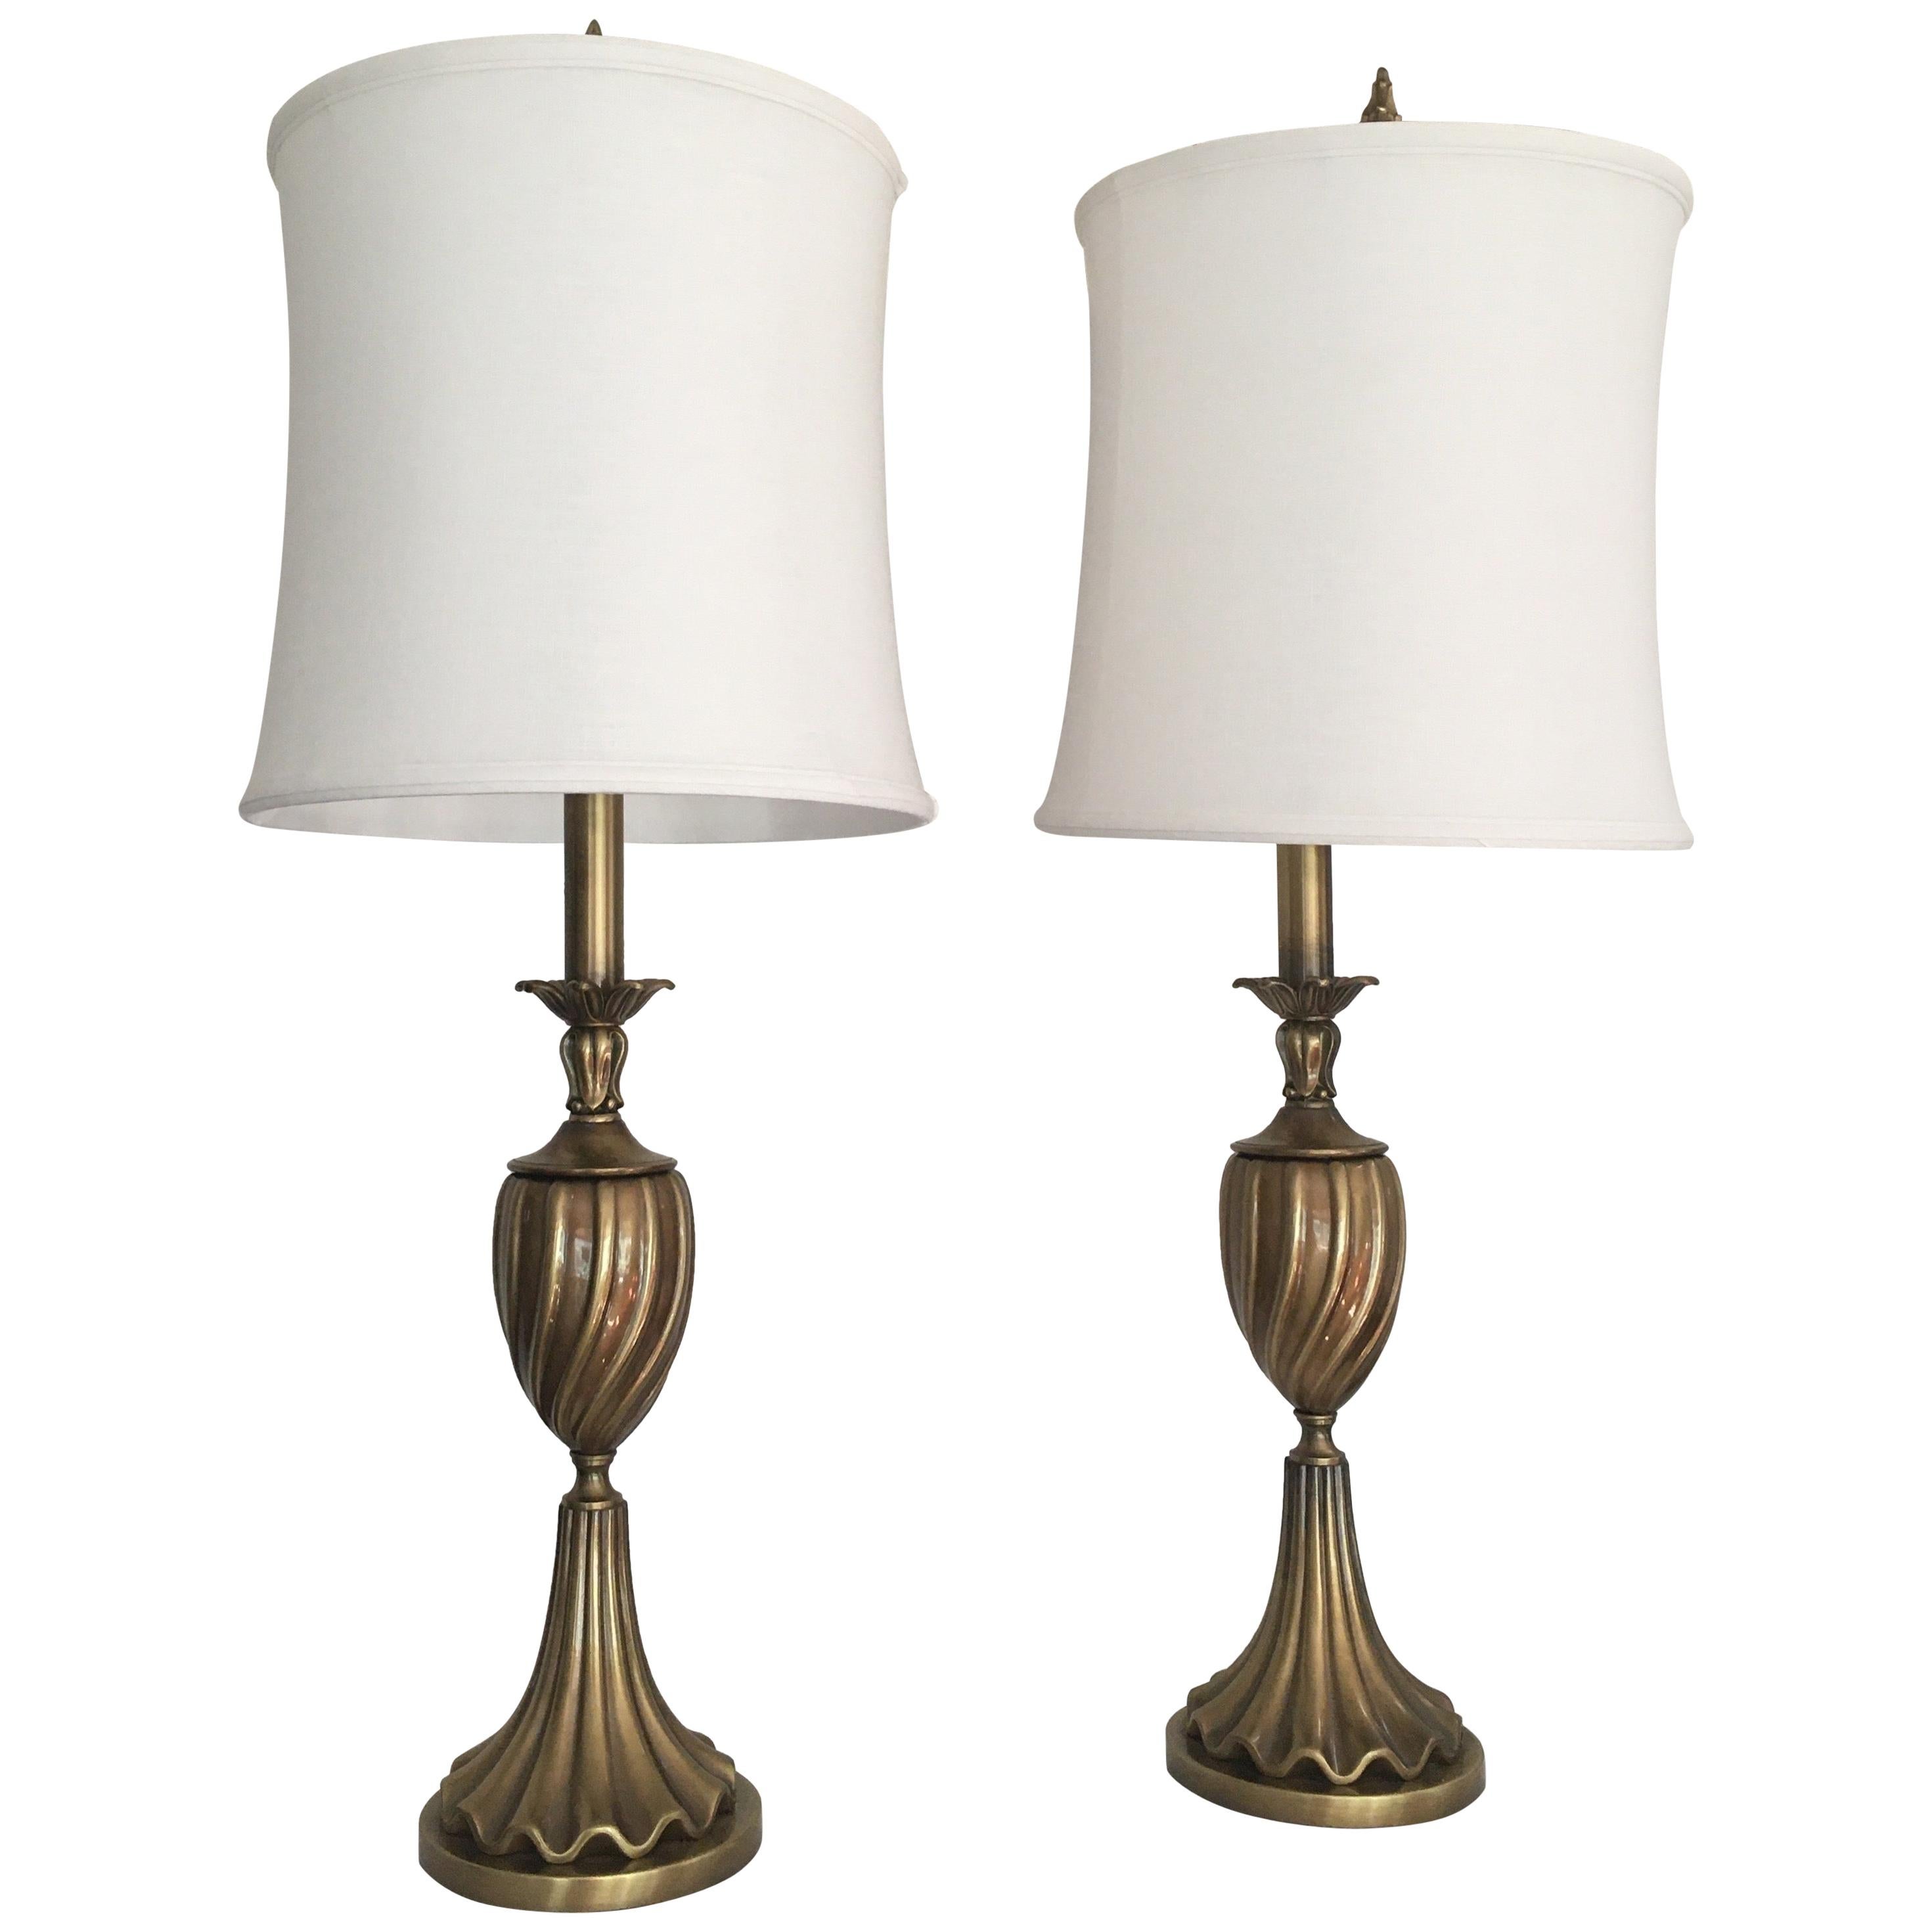 Pair of Brass Rembrandt Table Lamps